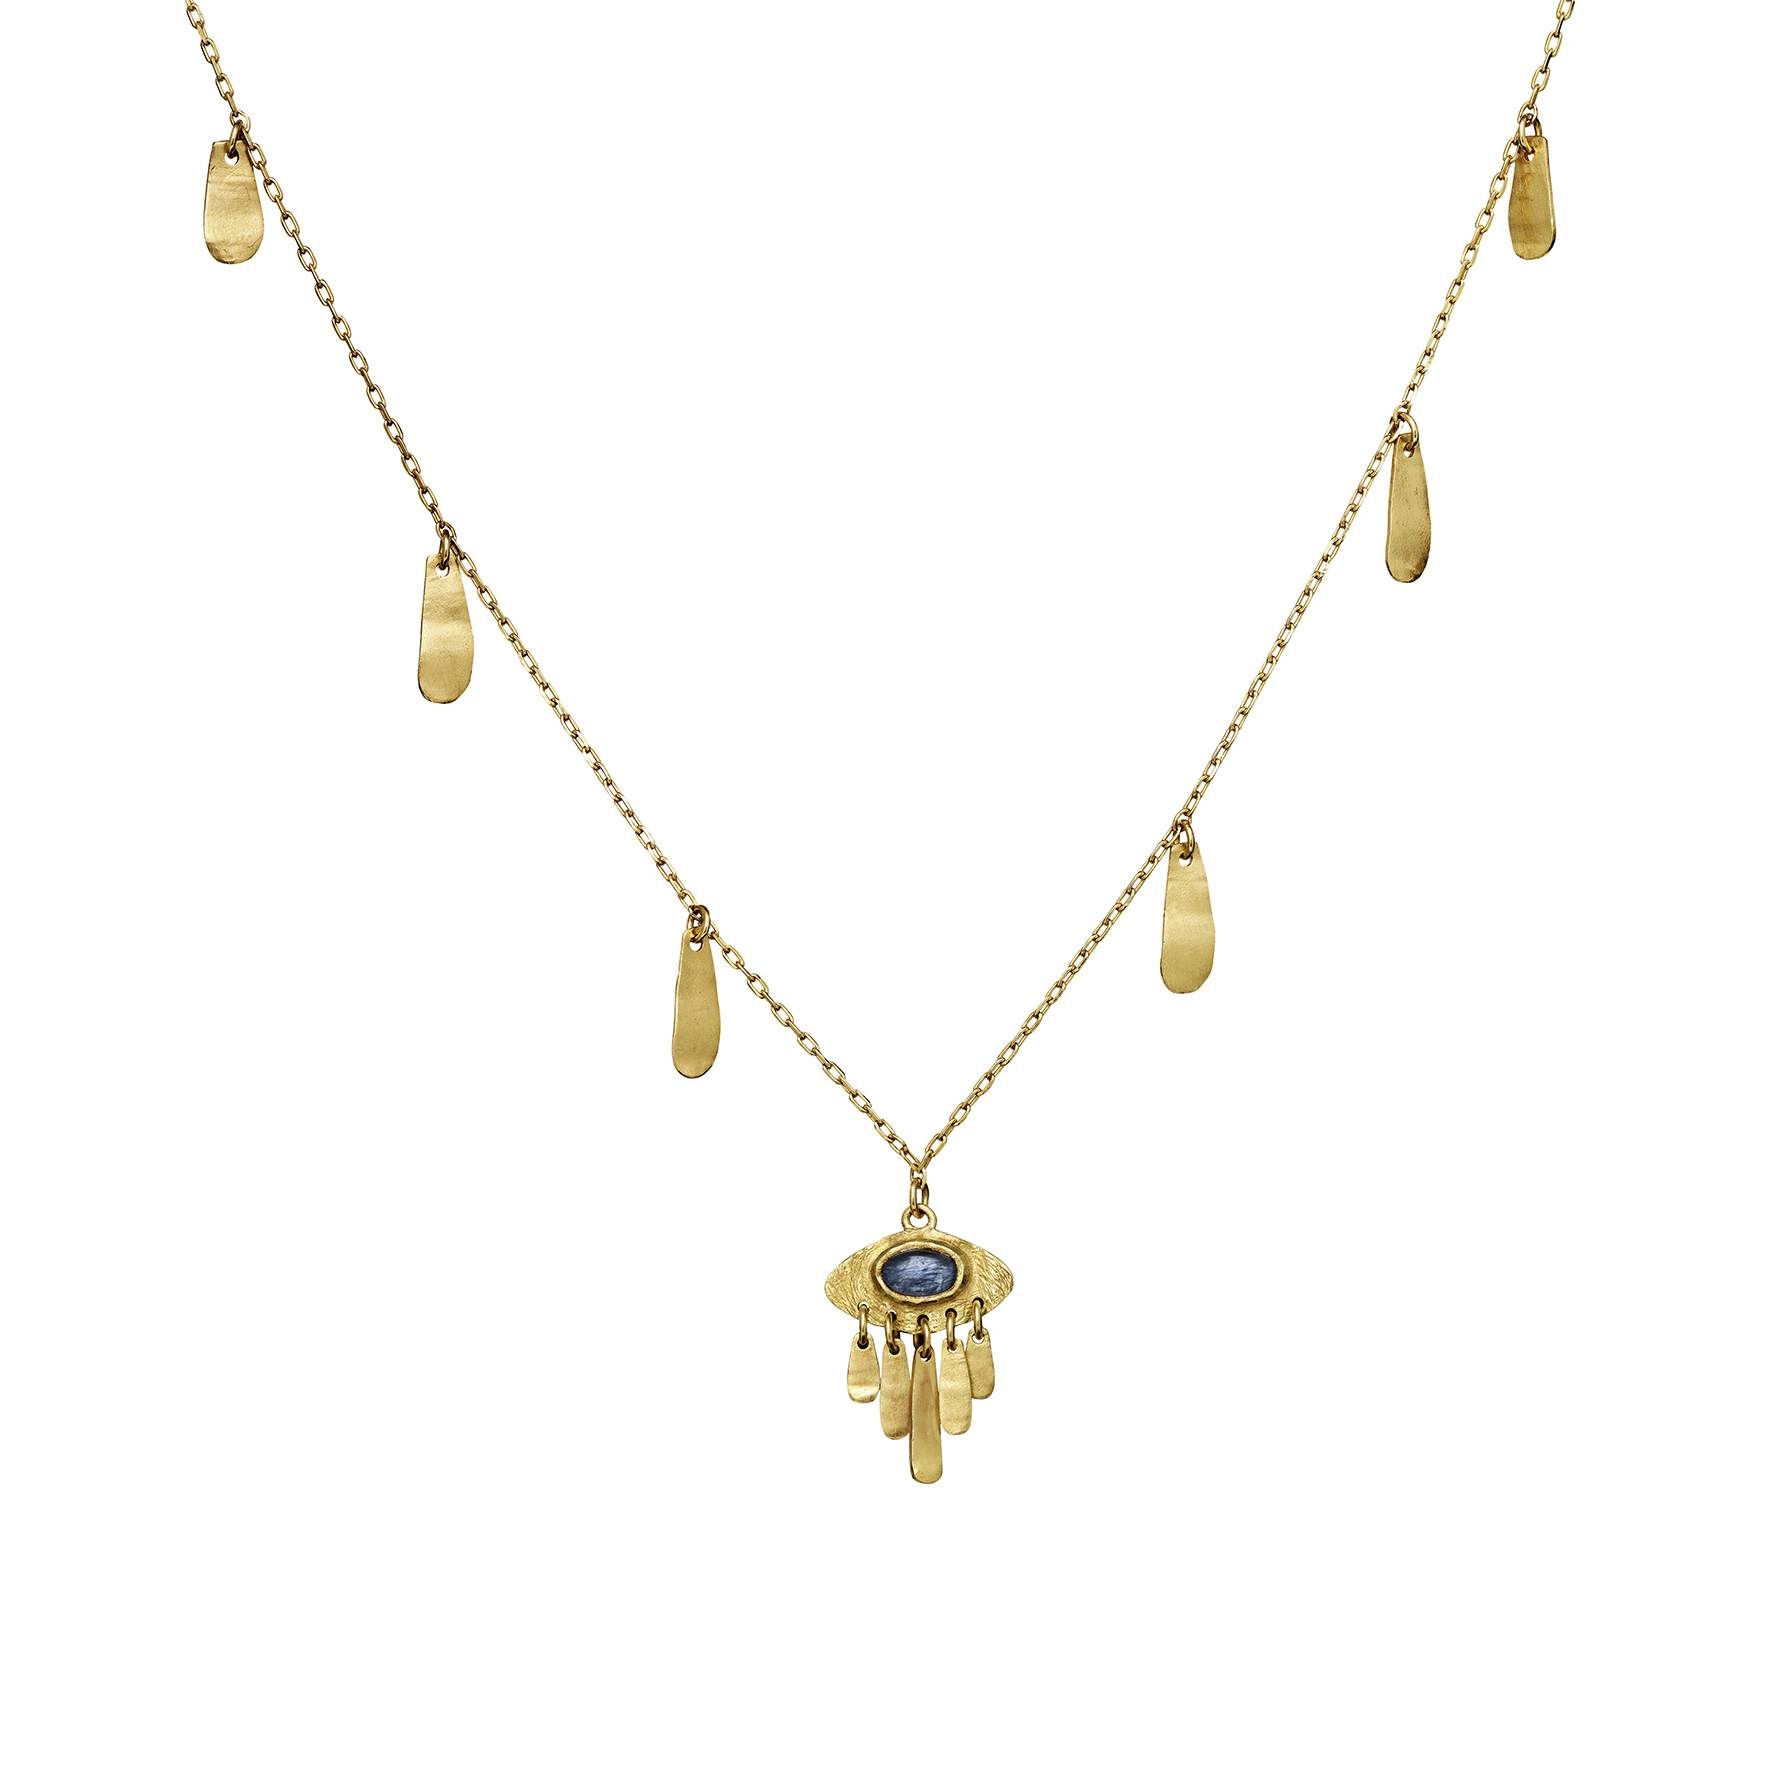 Bella Necklace from Maanesten in Goldplated-Silver Sterling 925